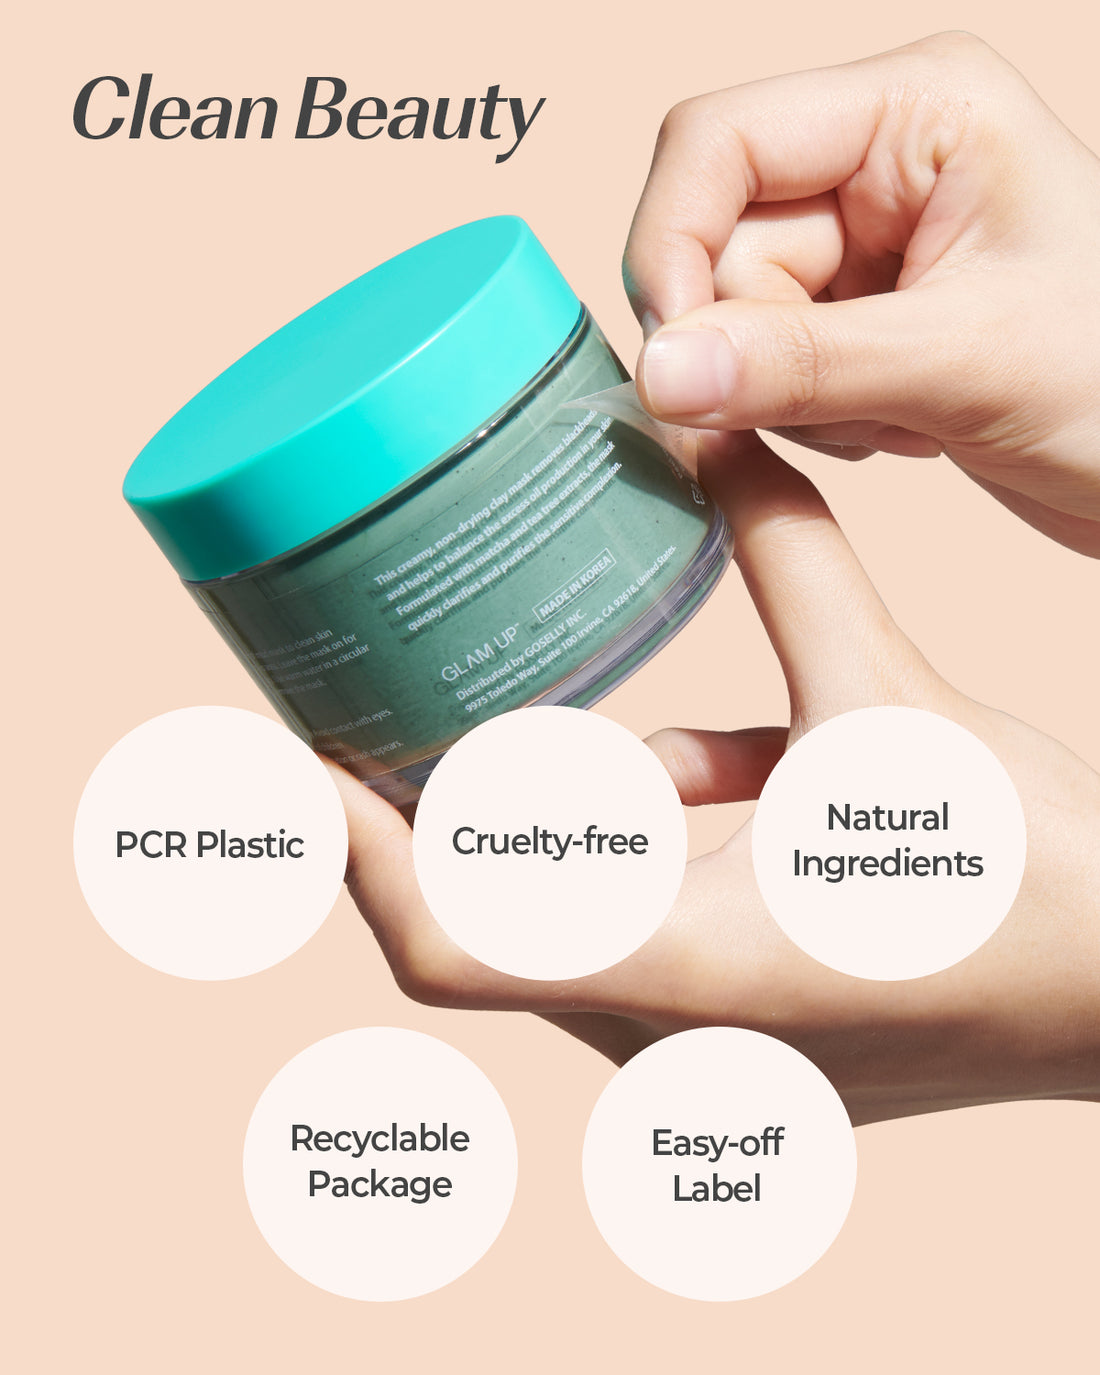 PCR plastic, cruelty free, natural ingredients, recyclable package, easy off label